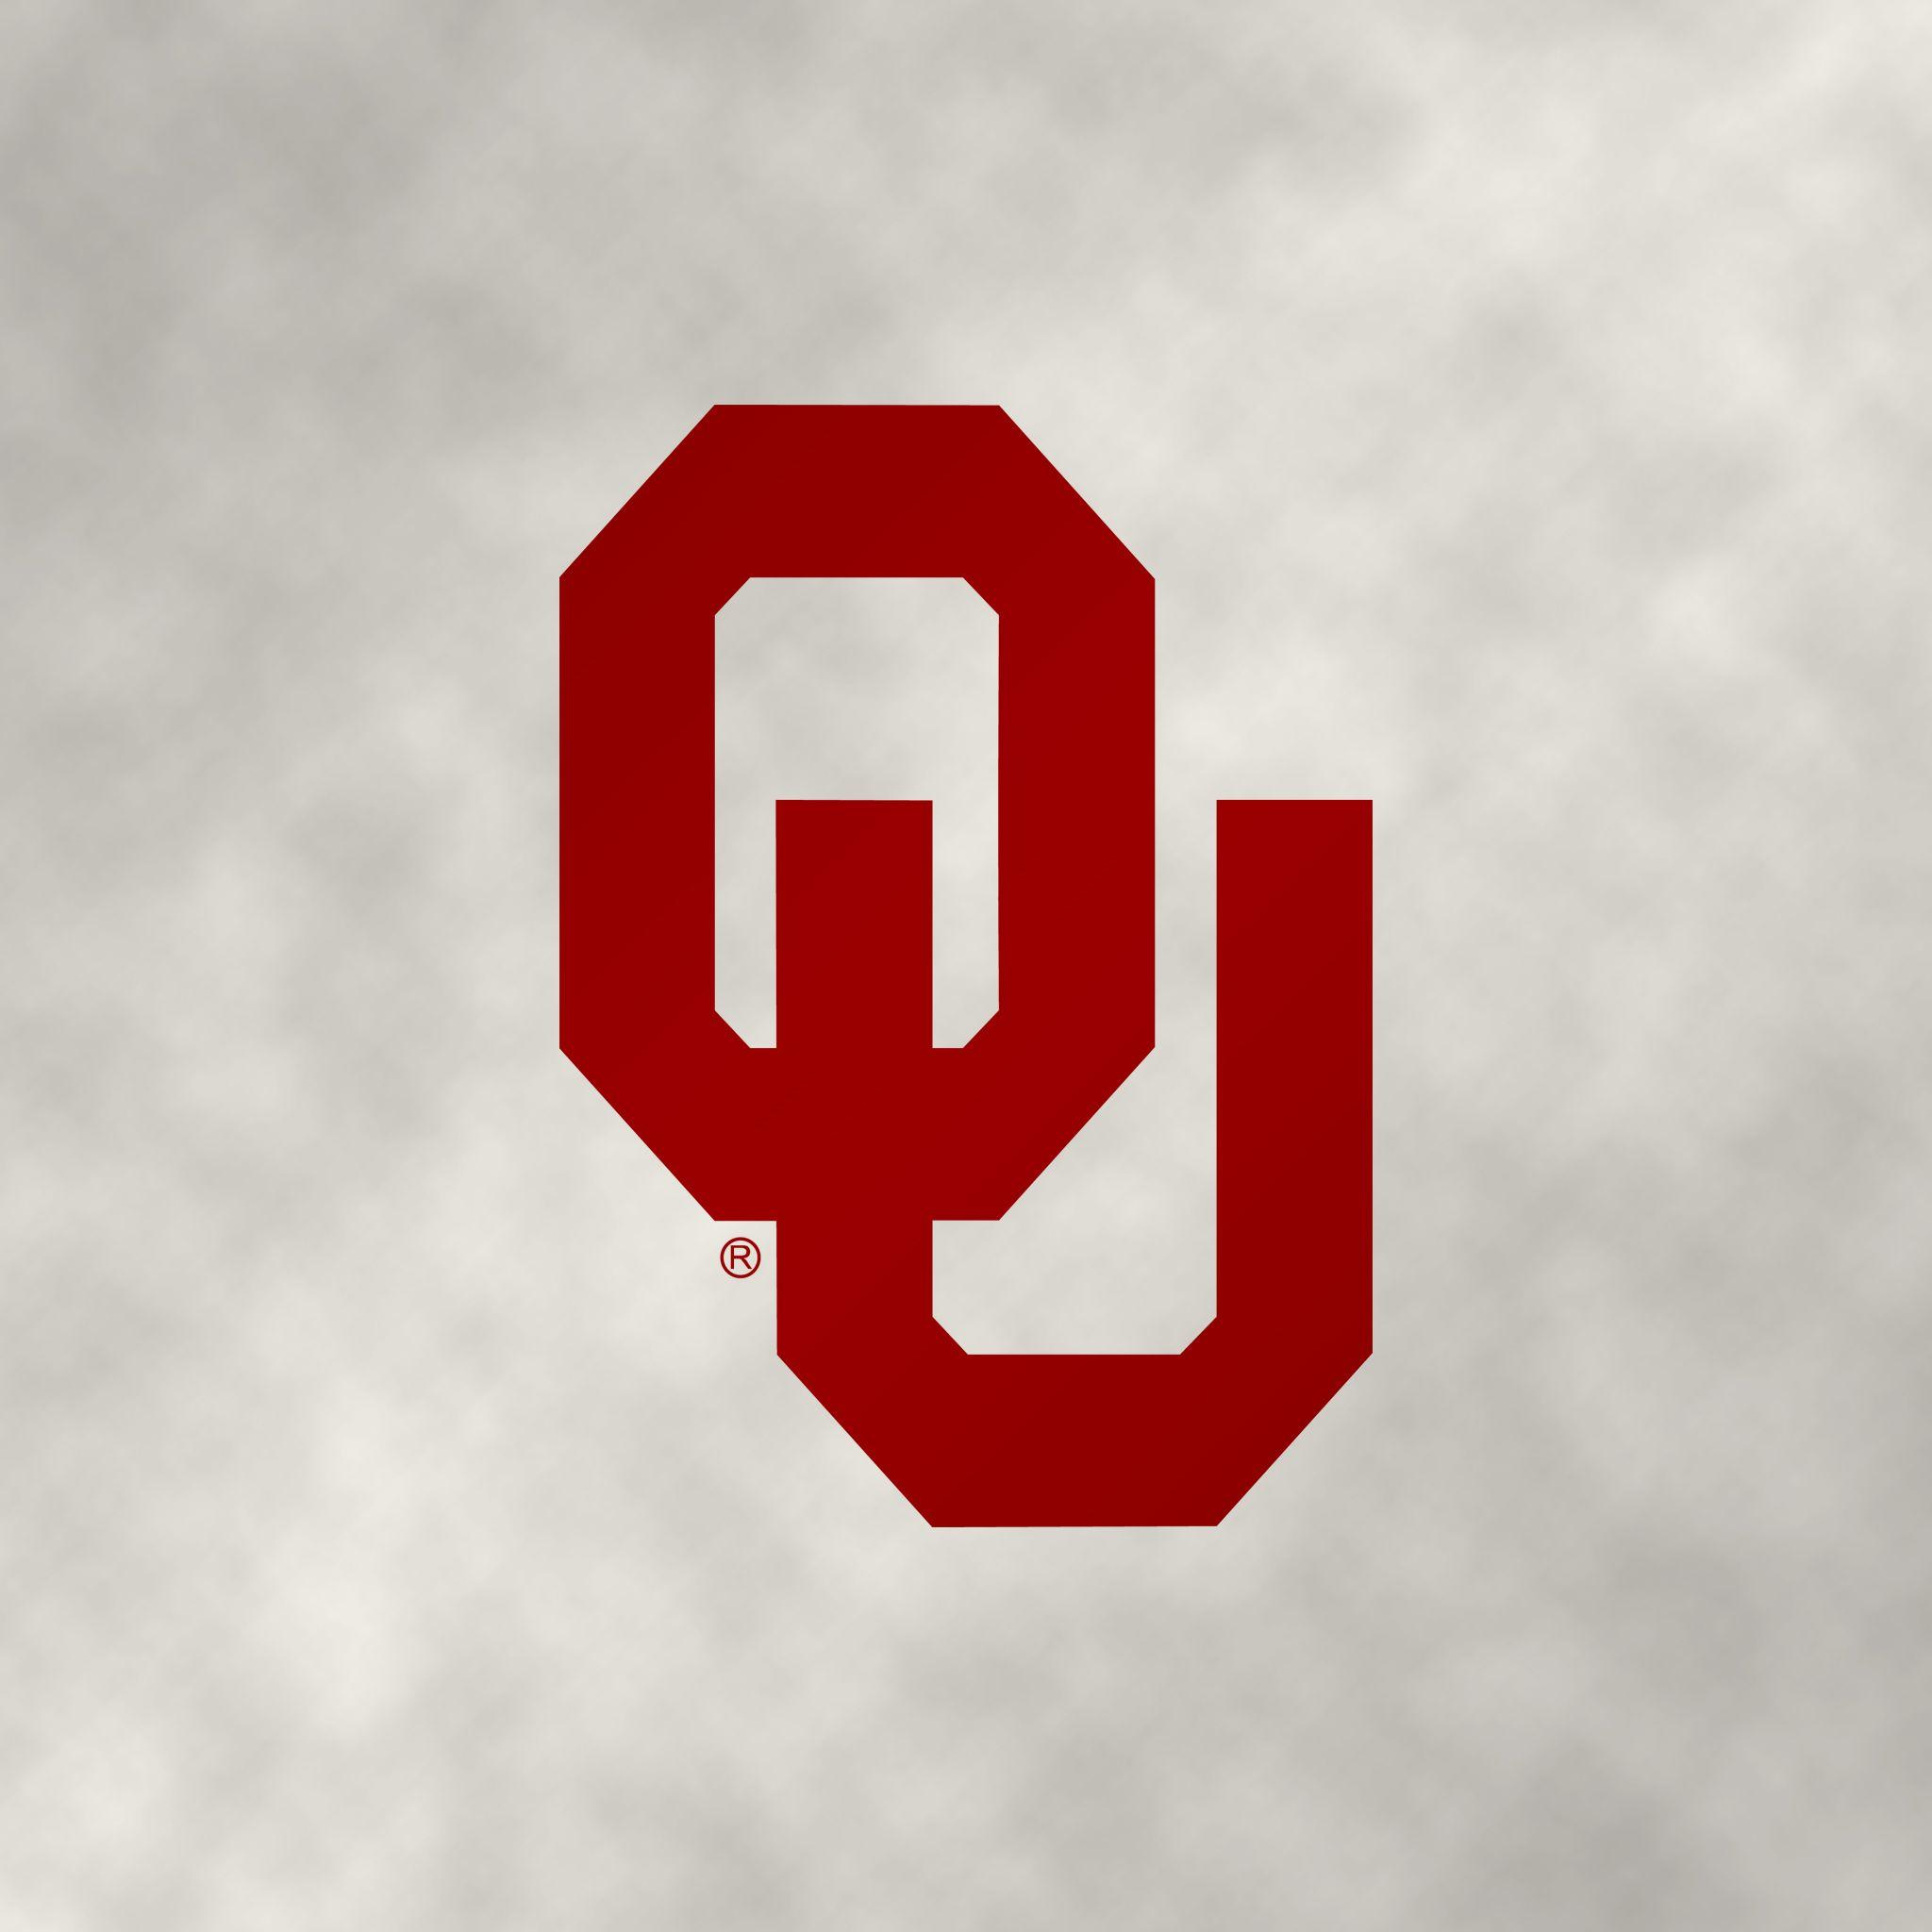 2016 Oklahoma University Football Schedule Wallpapers Wallpaper Cave